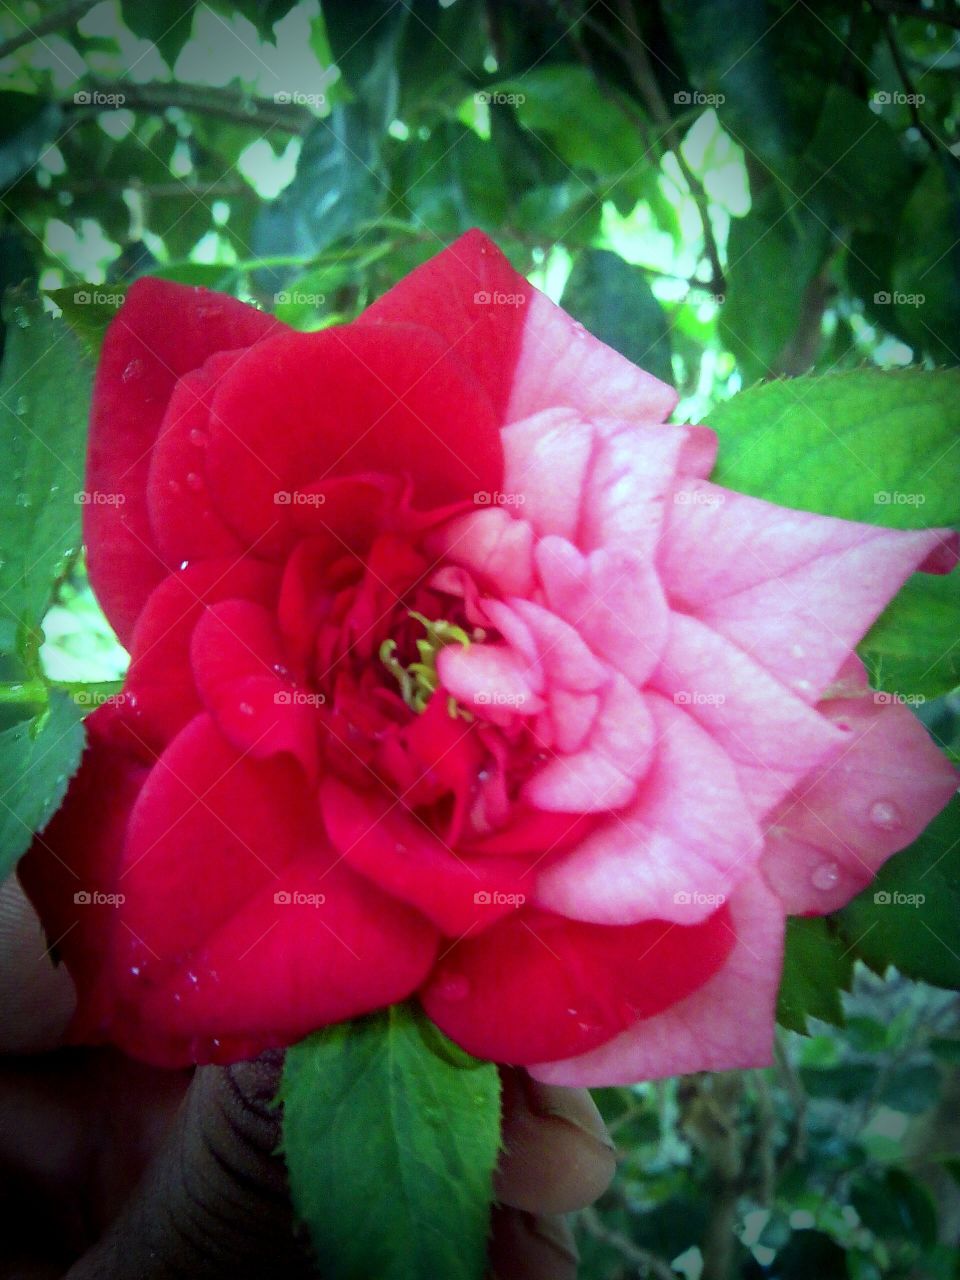 This is a indian Rose (this is riyal pic  No edits)